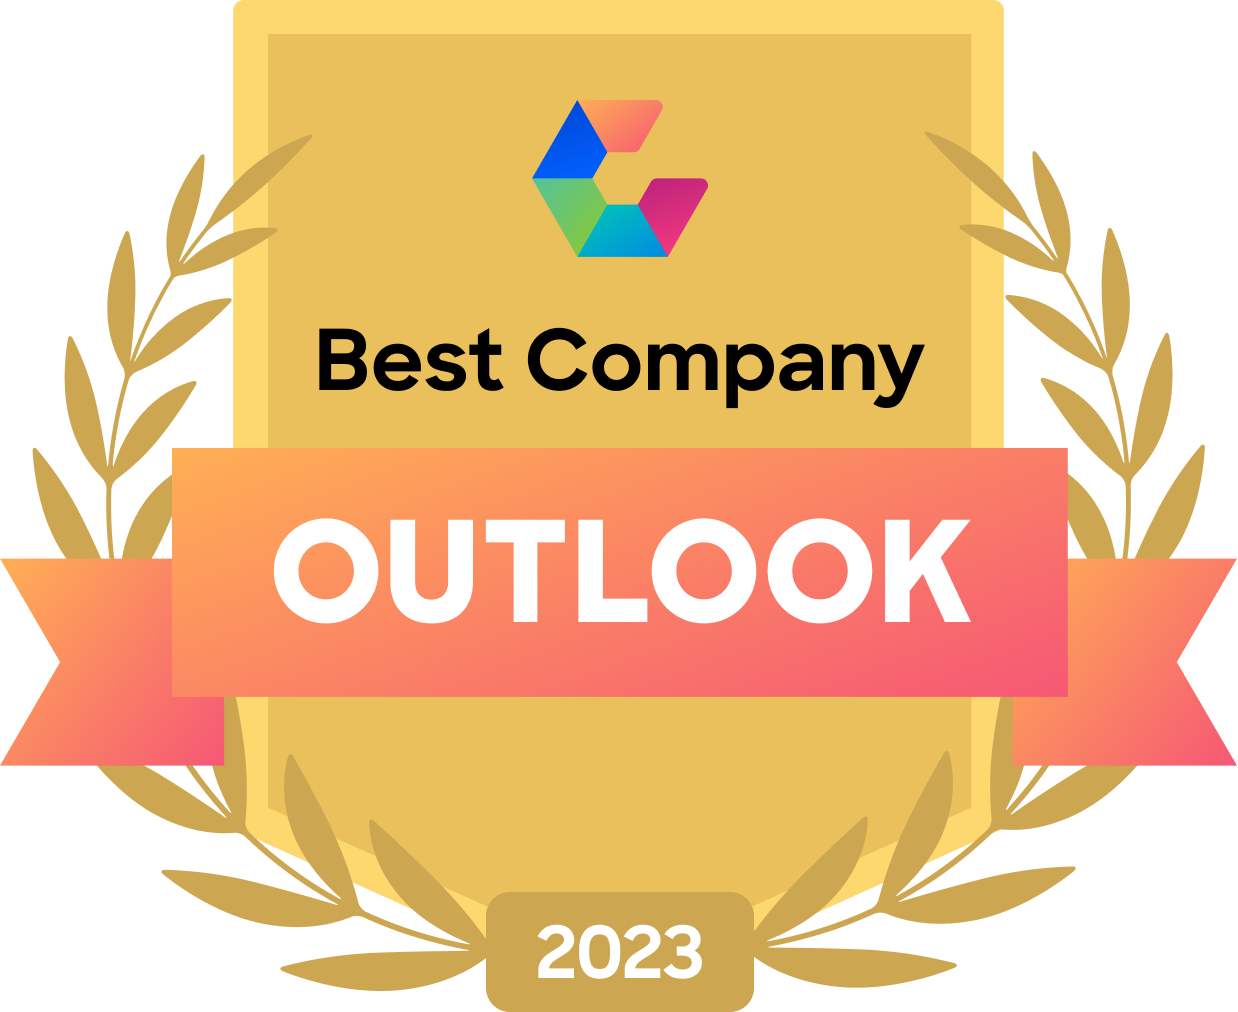 Best Company Outlook 2023